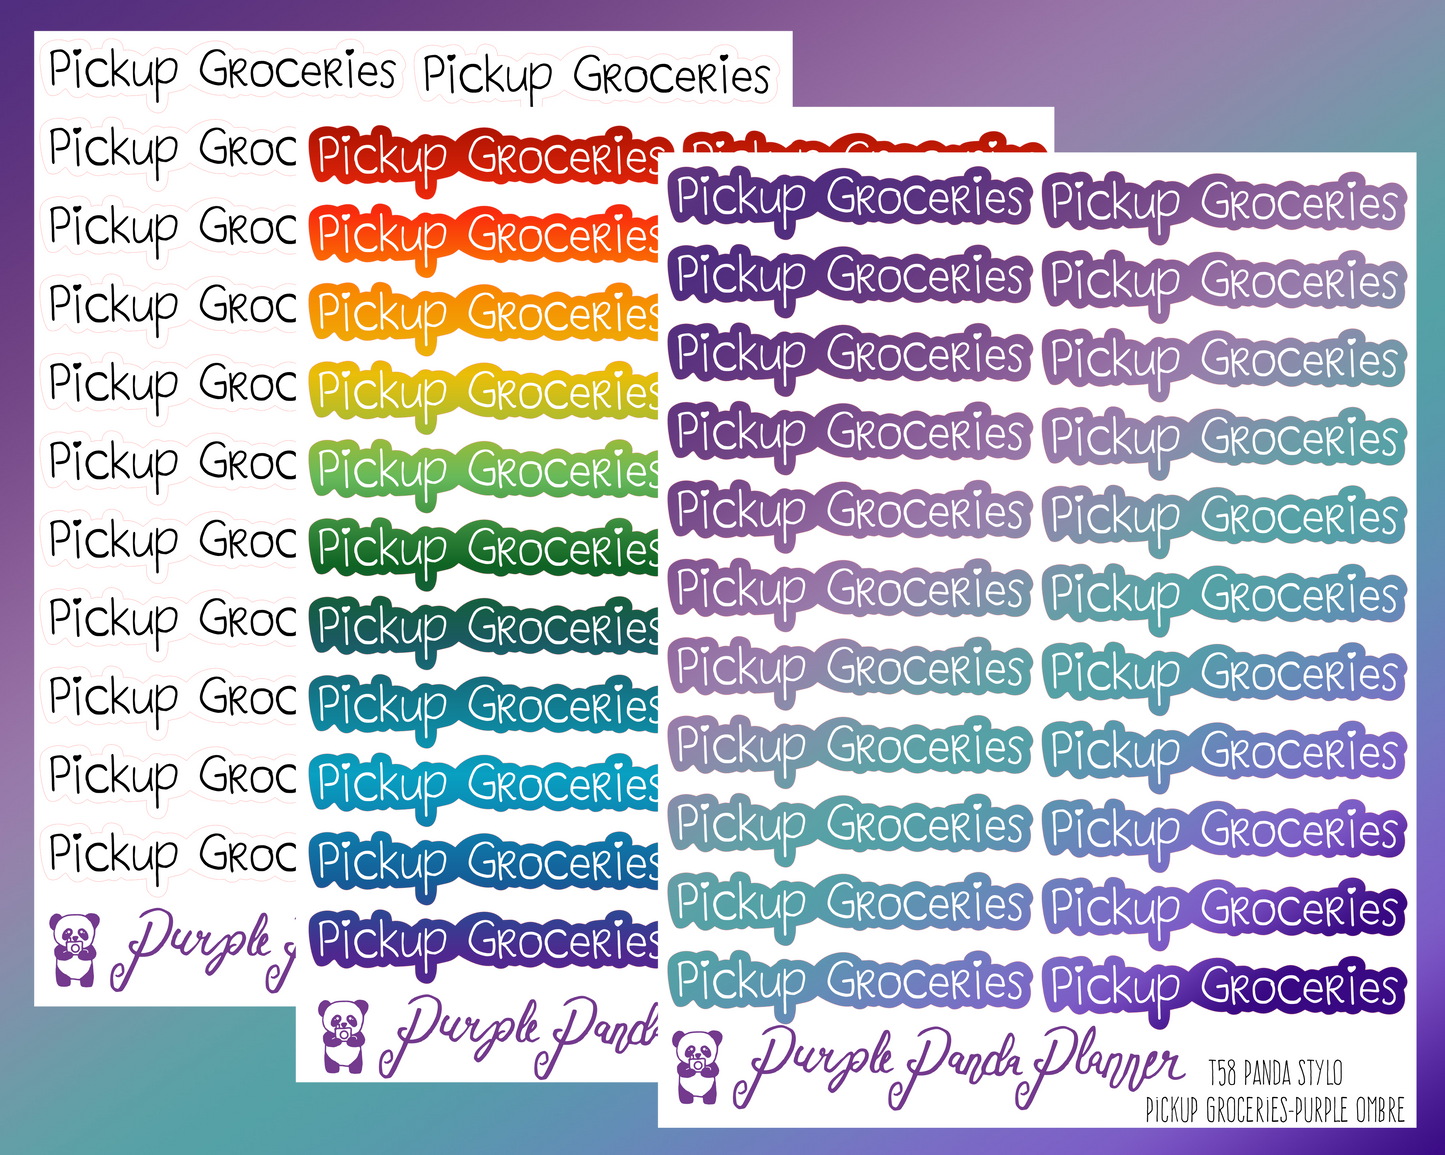 Pickup Groceries (T58) - Panda Stylo Script - Black, Rainbow, or Purple Ombre - Stickers for Planner, Journal or Calendar